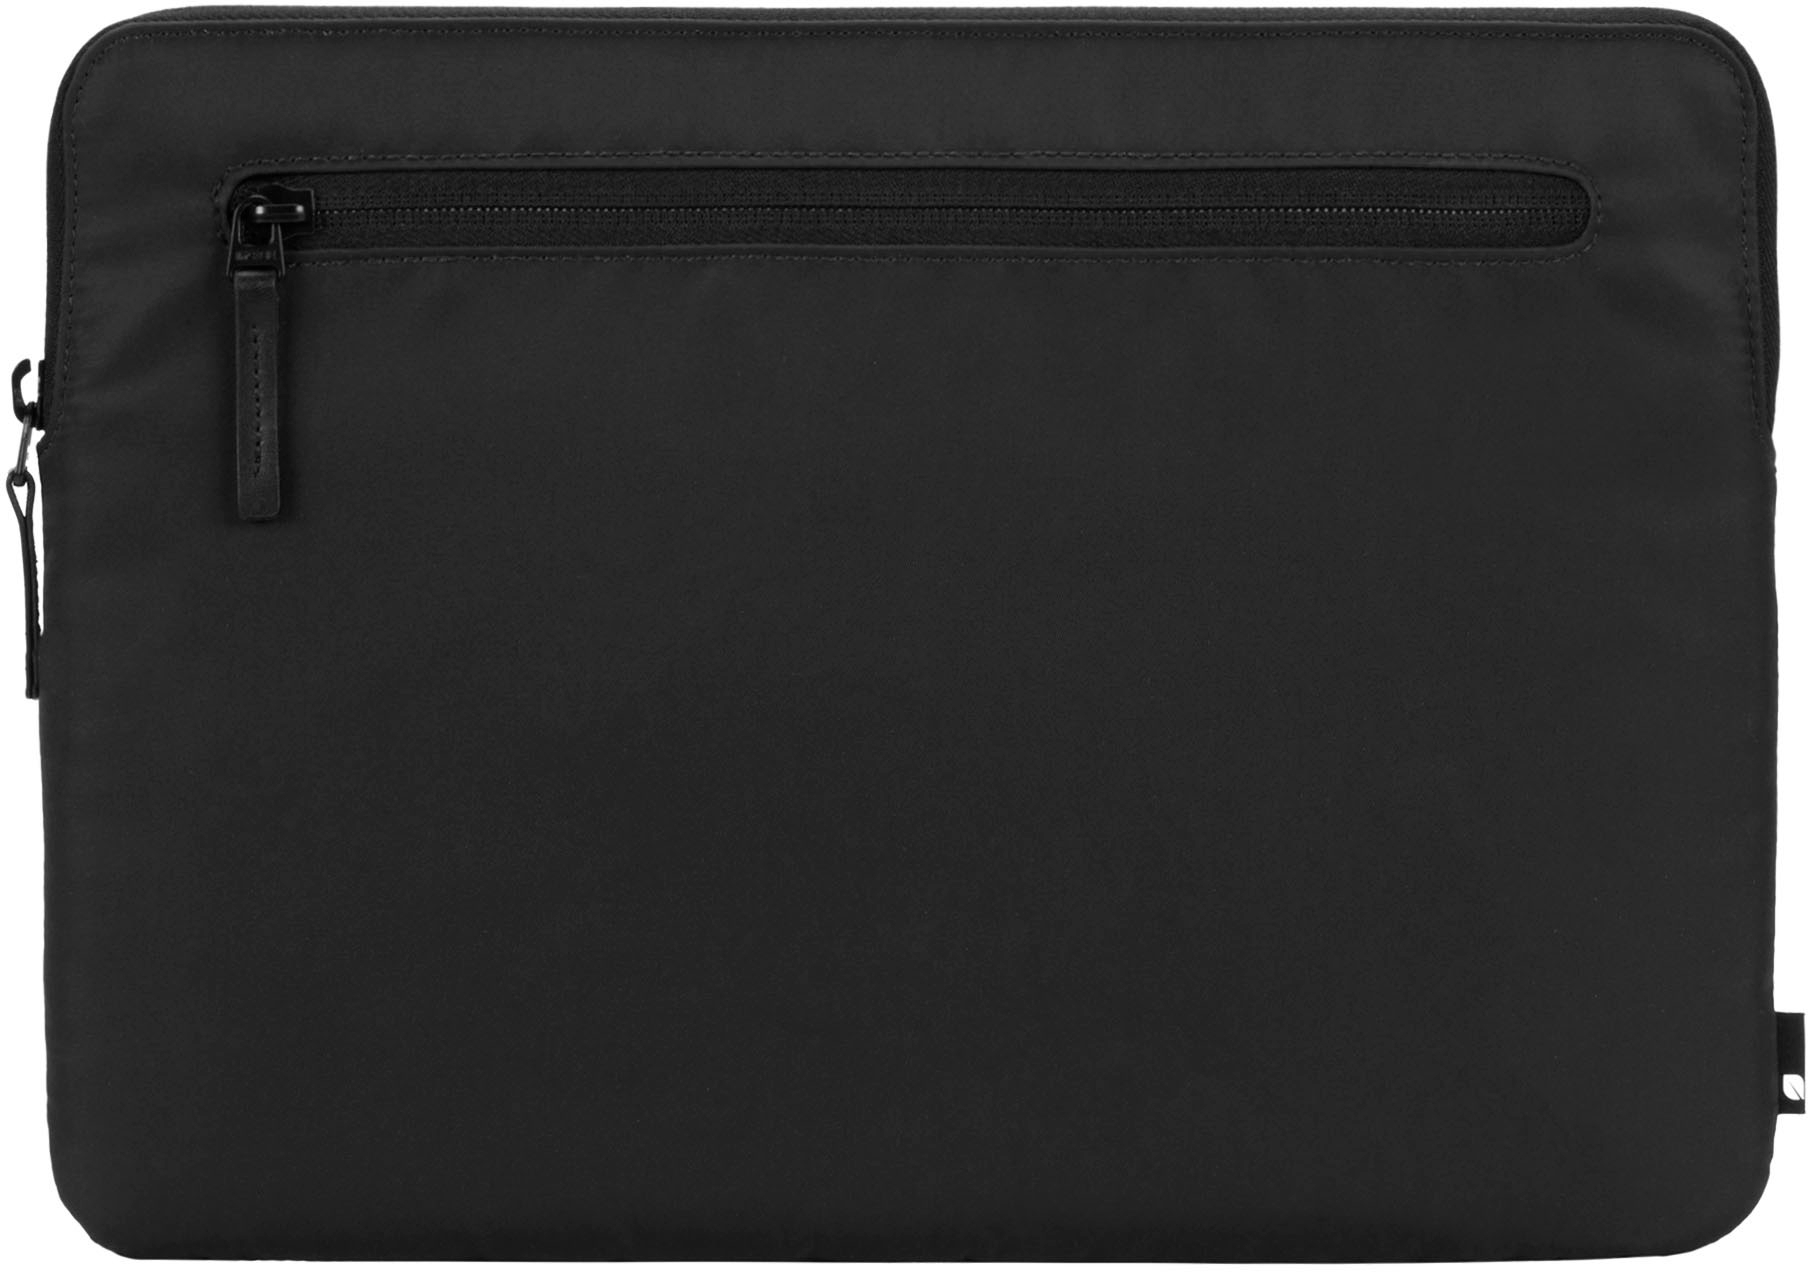 Back View: Incase - Compact Sleeve up to 14" Macbook - Black